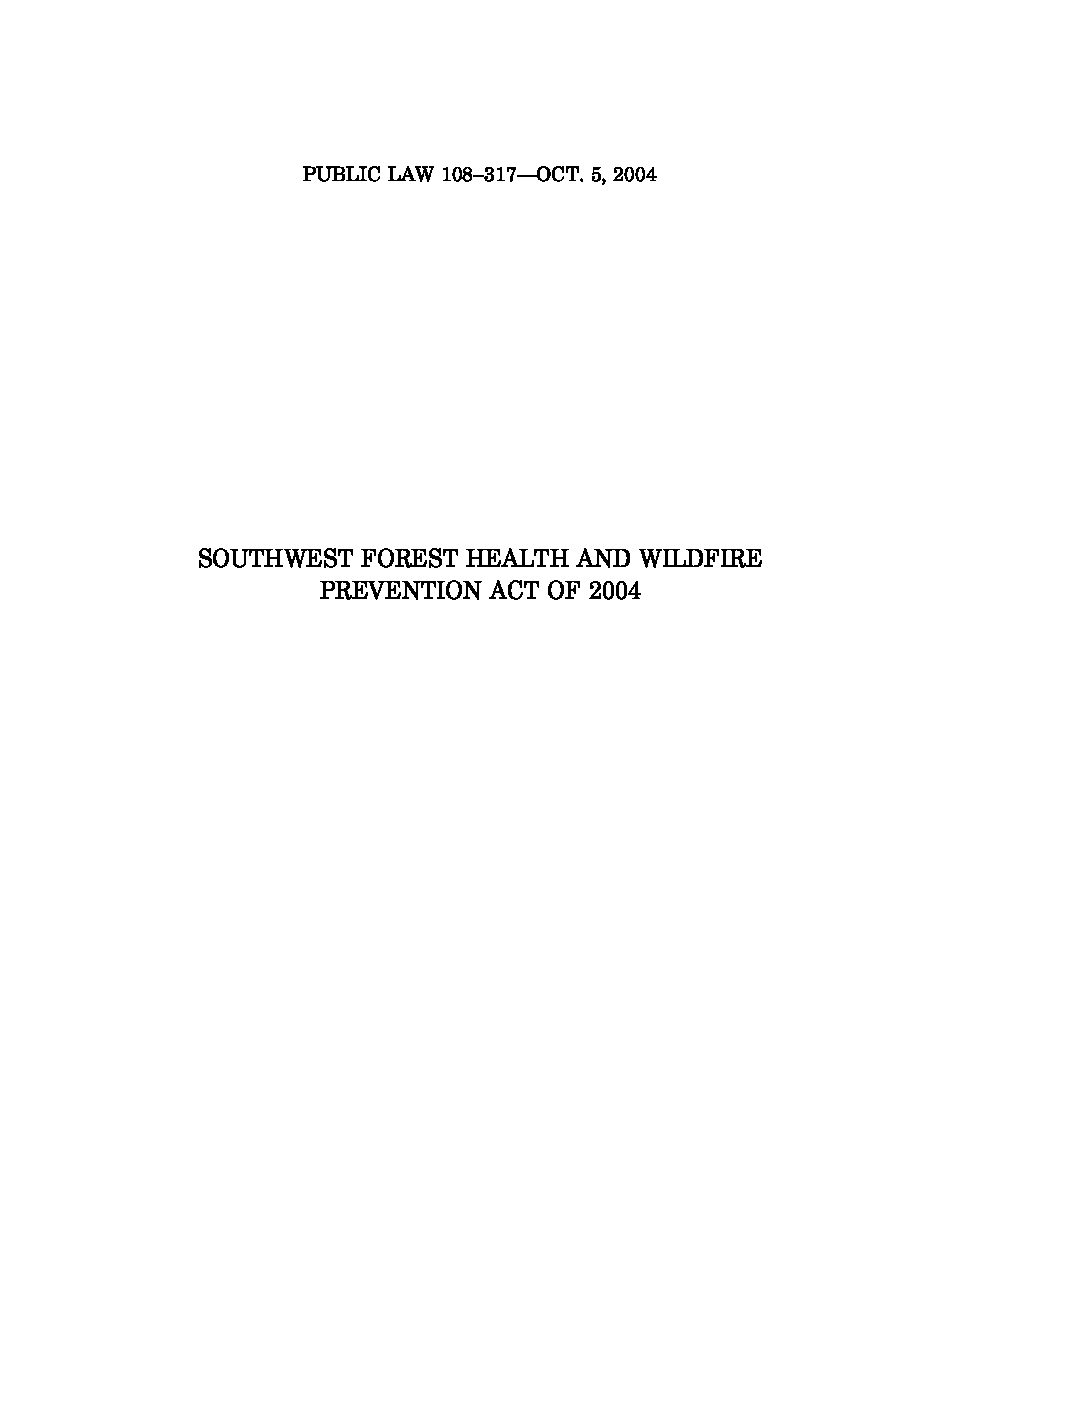 Southwest Forest Health and Wildfire Prevention Act of 2004